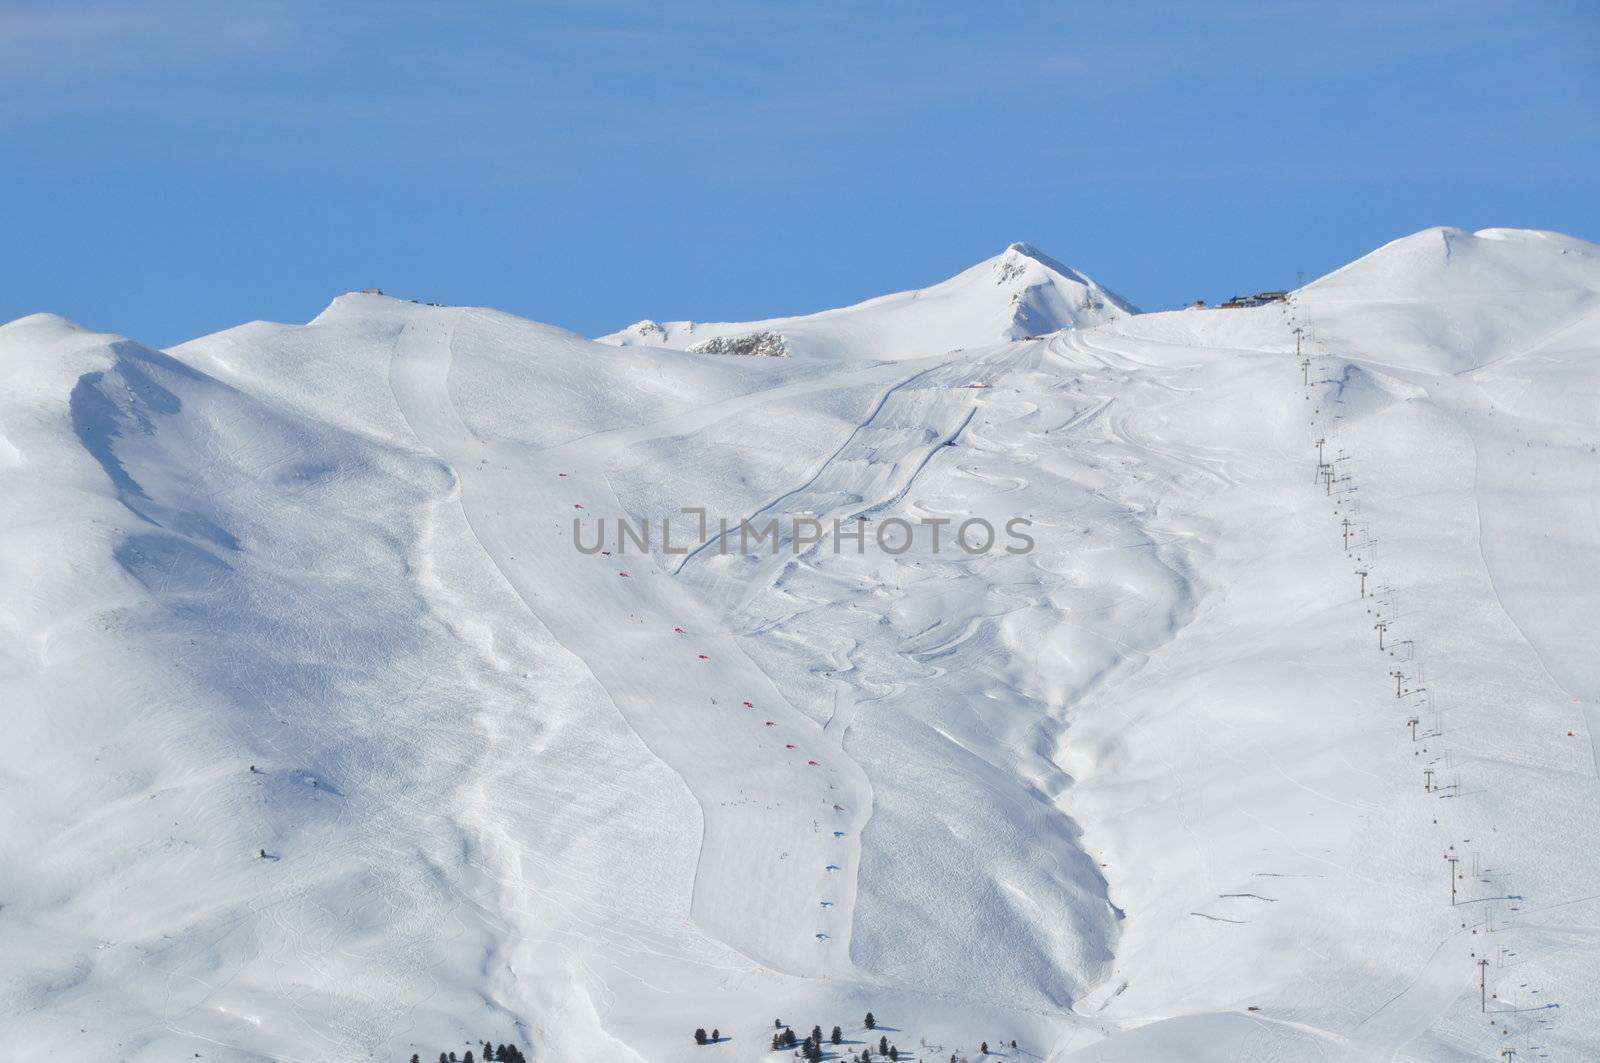 View on a steep skking mountain with two slopes, skiers and lifts - shot in Livigno, Italian Alps